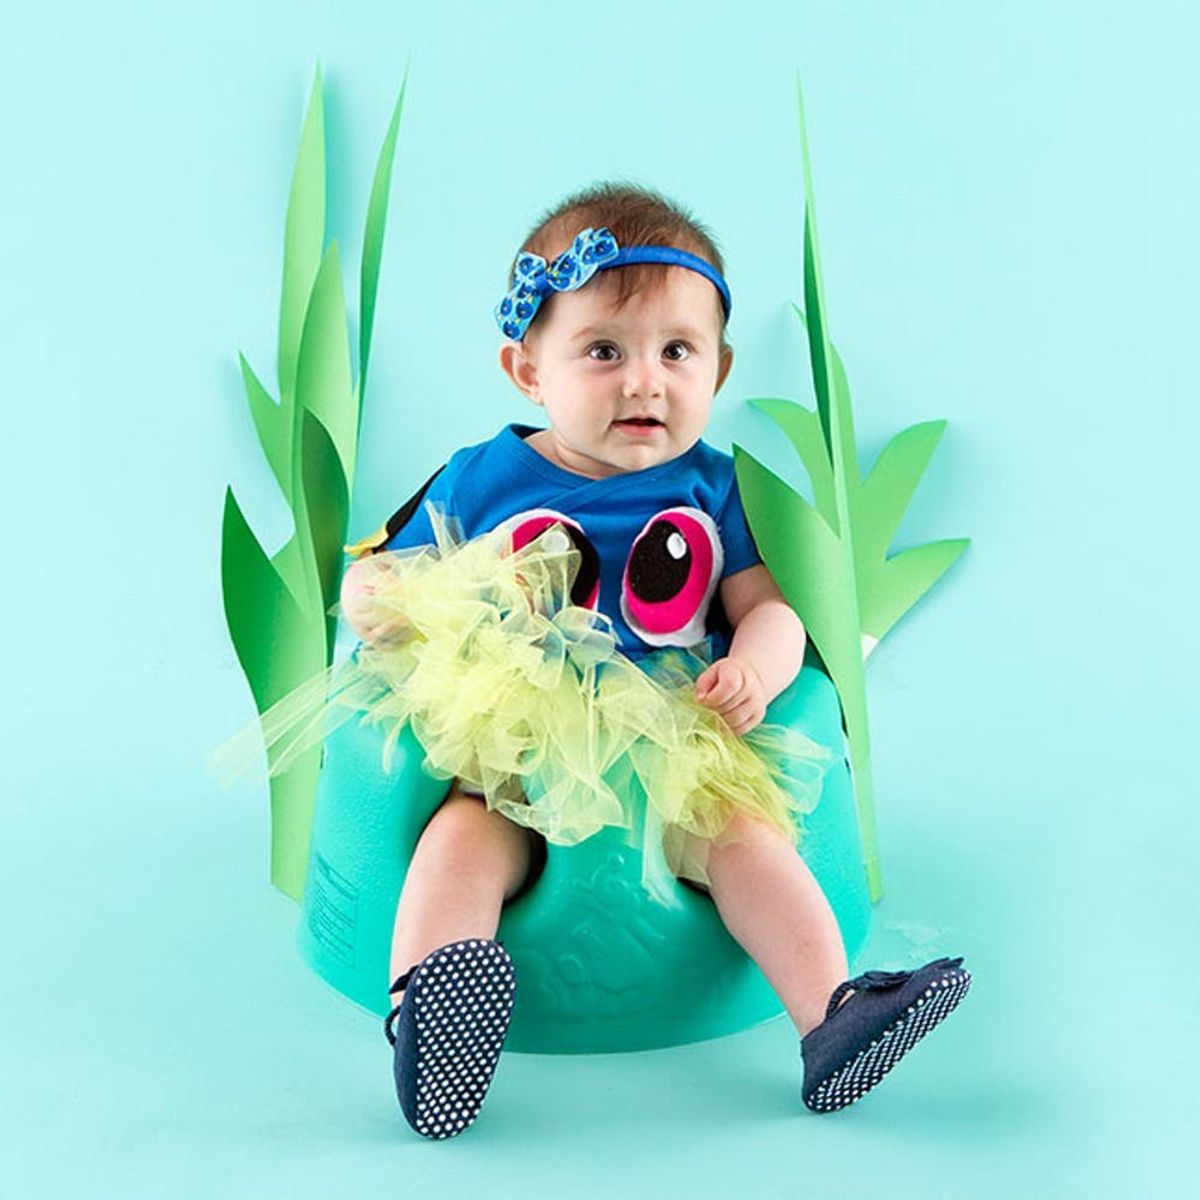 Dress Up Your Little One in This Finding Dory Costume This Halloween